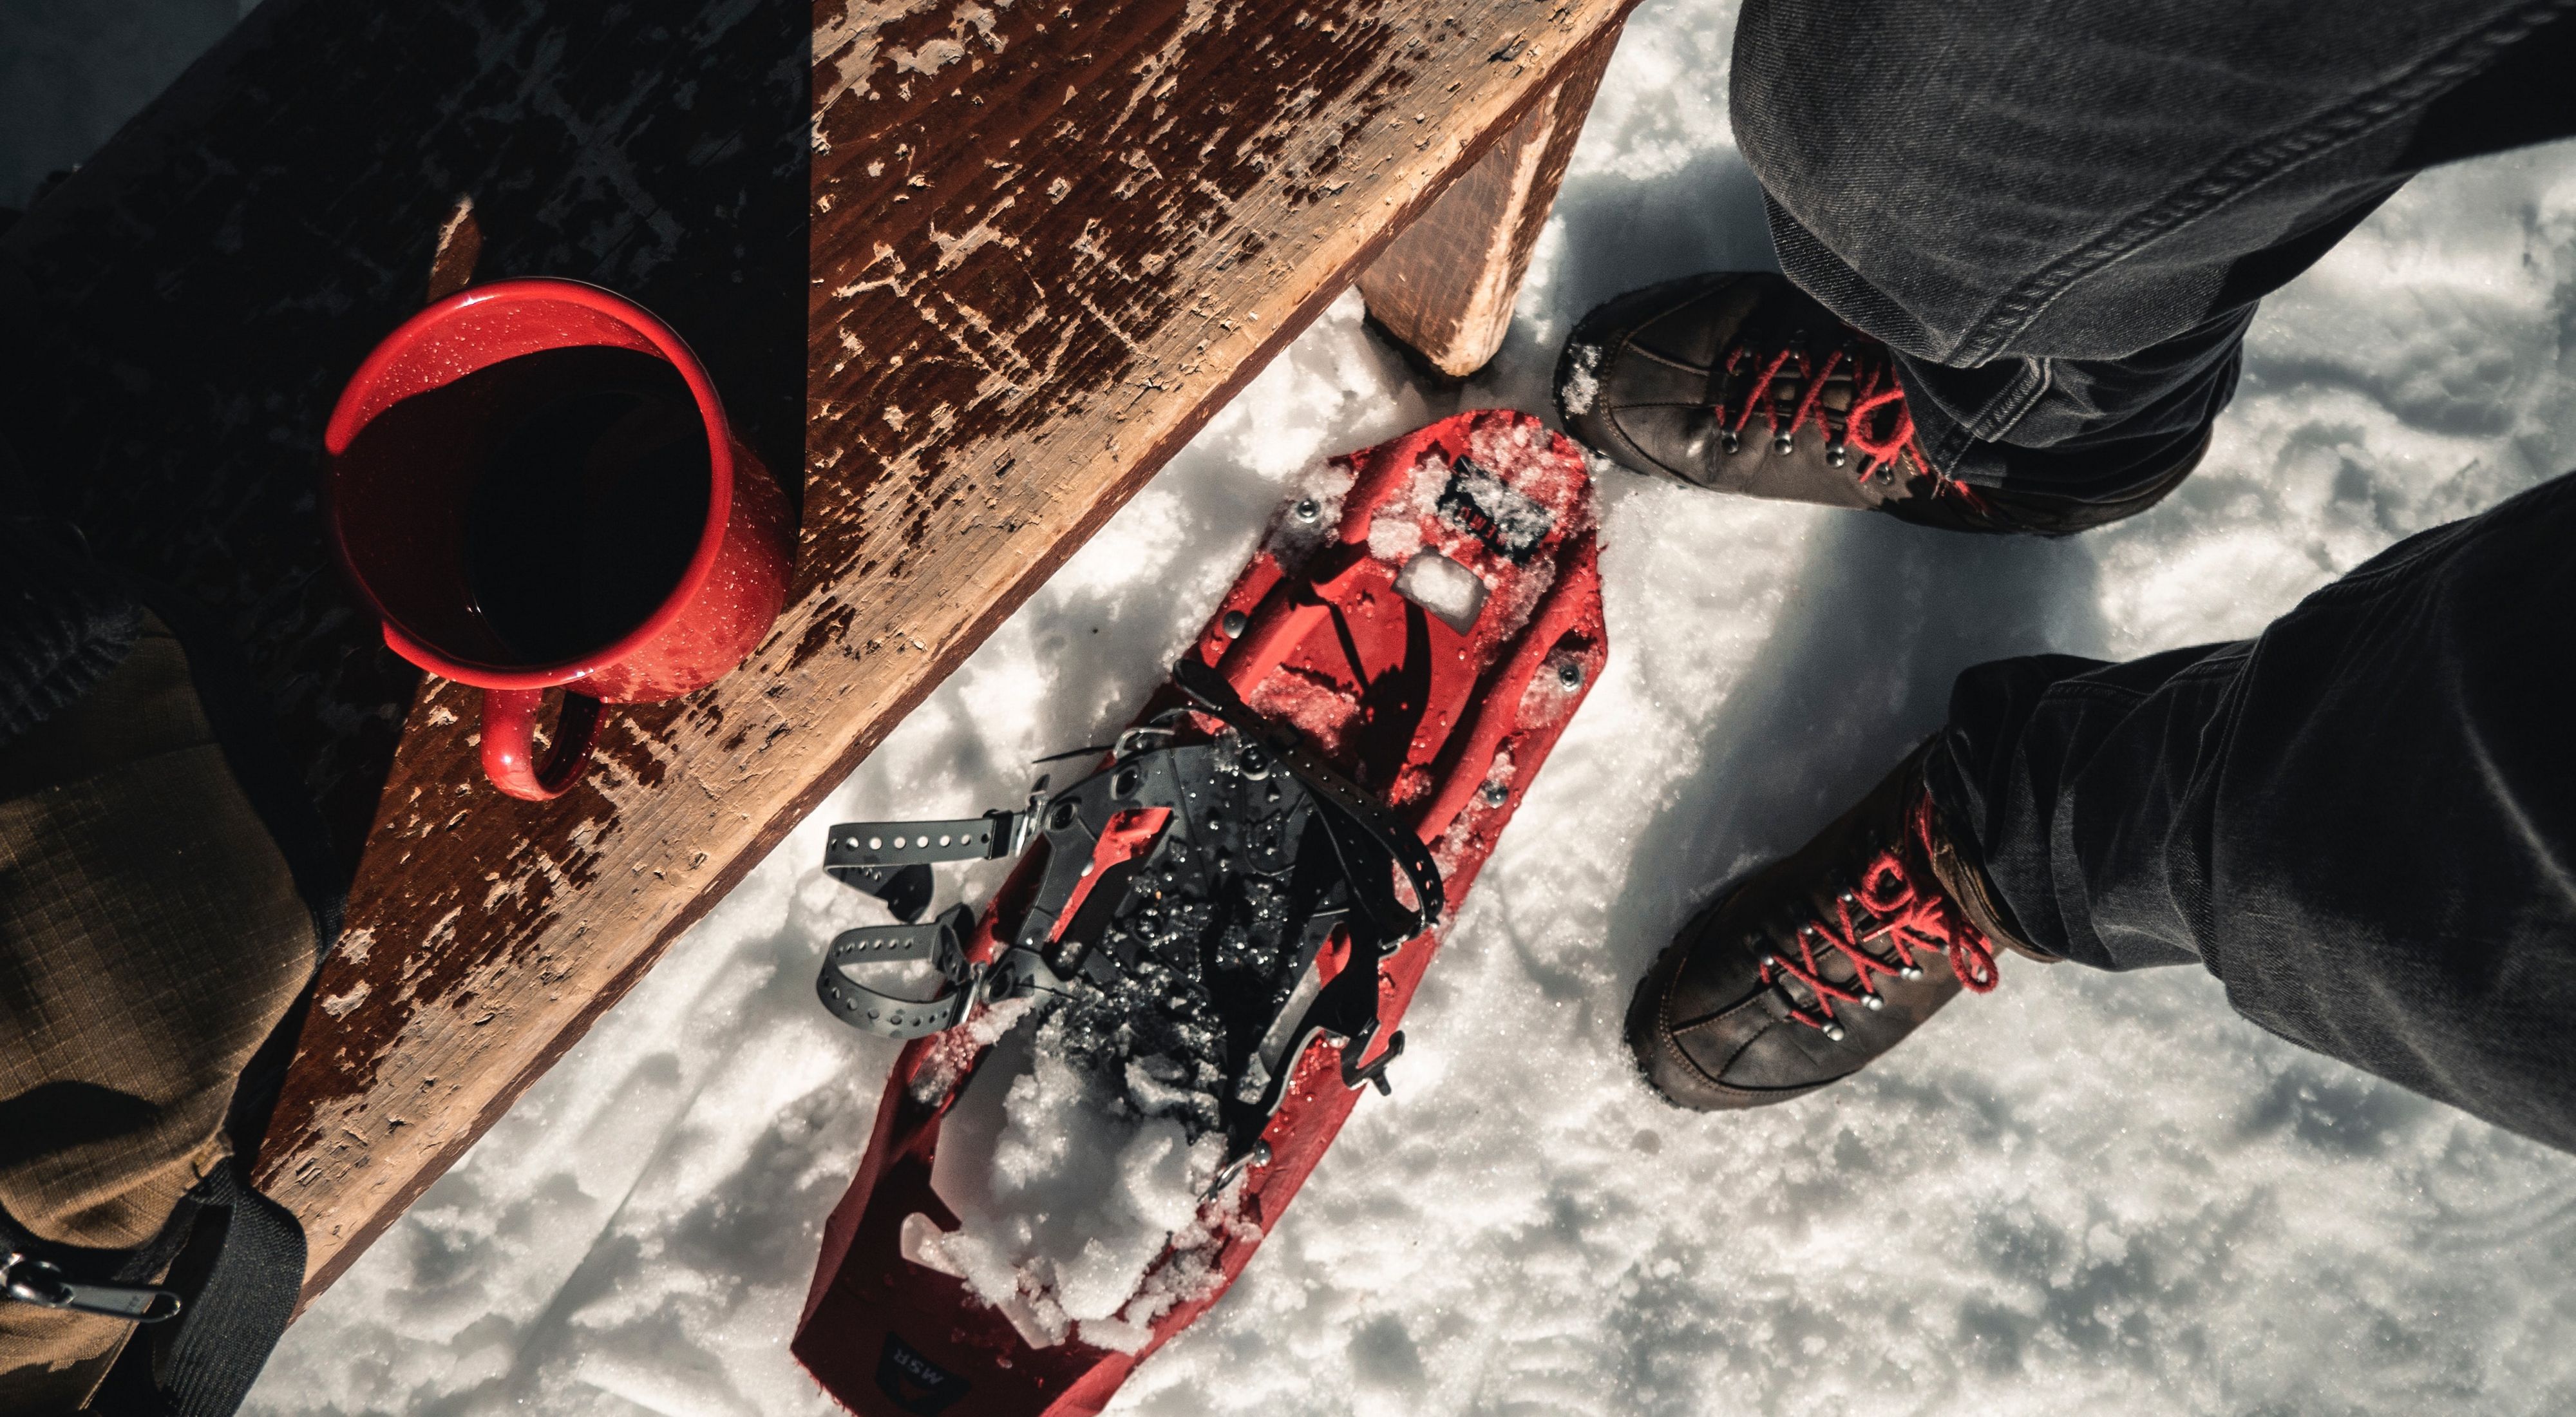 A view of a person's feet in the snow next to a pair of red snowshoes.